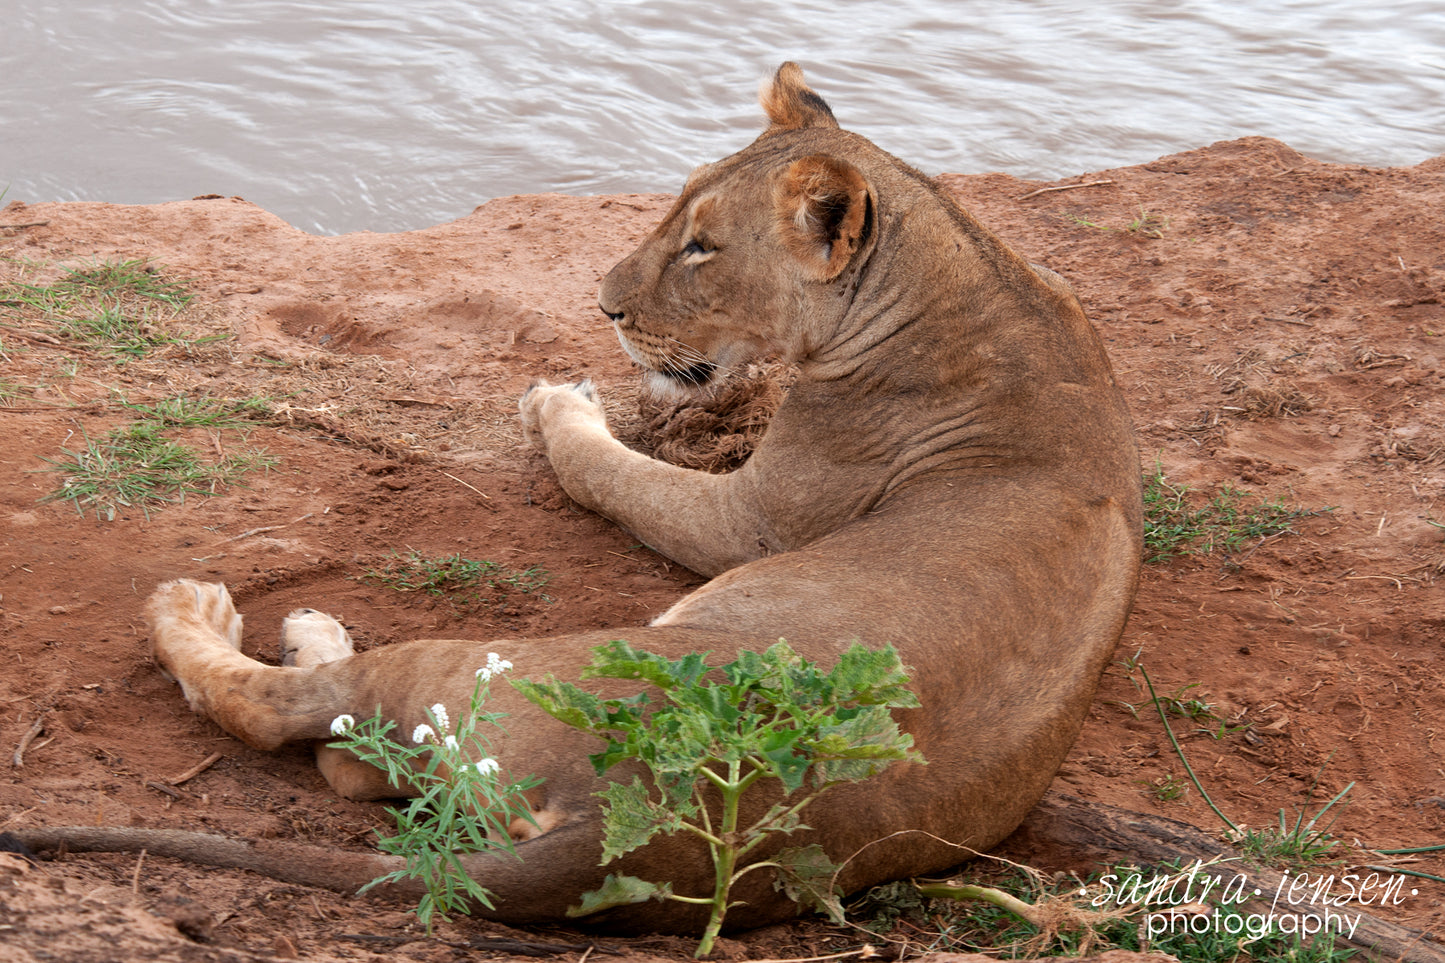 Print - African Lion resting by the River